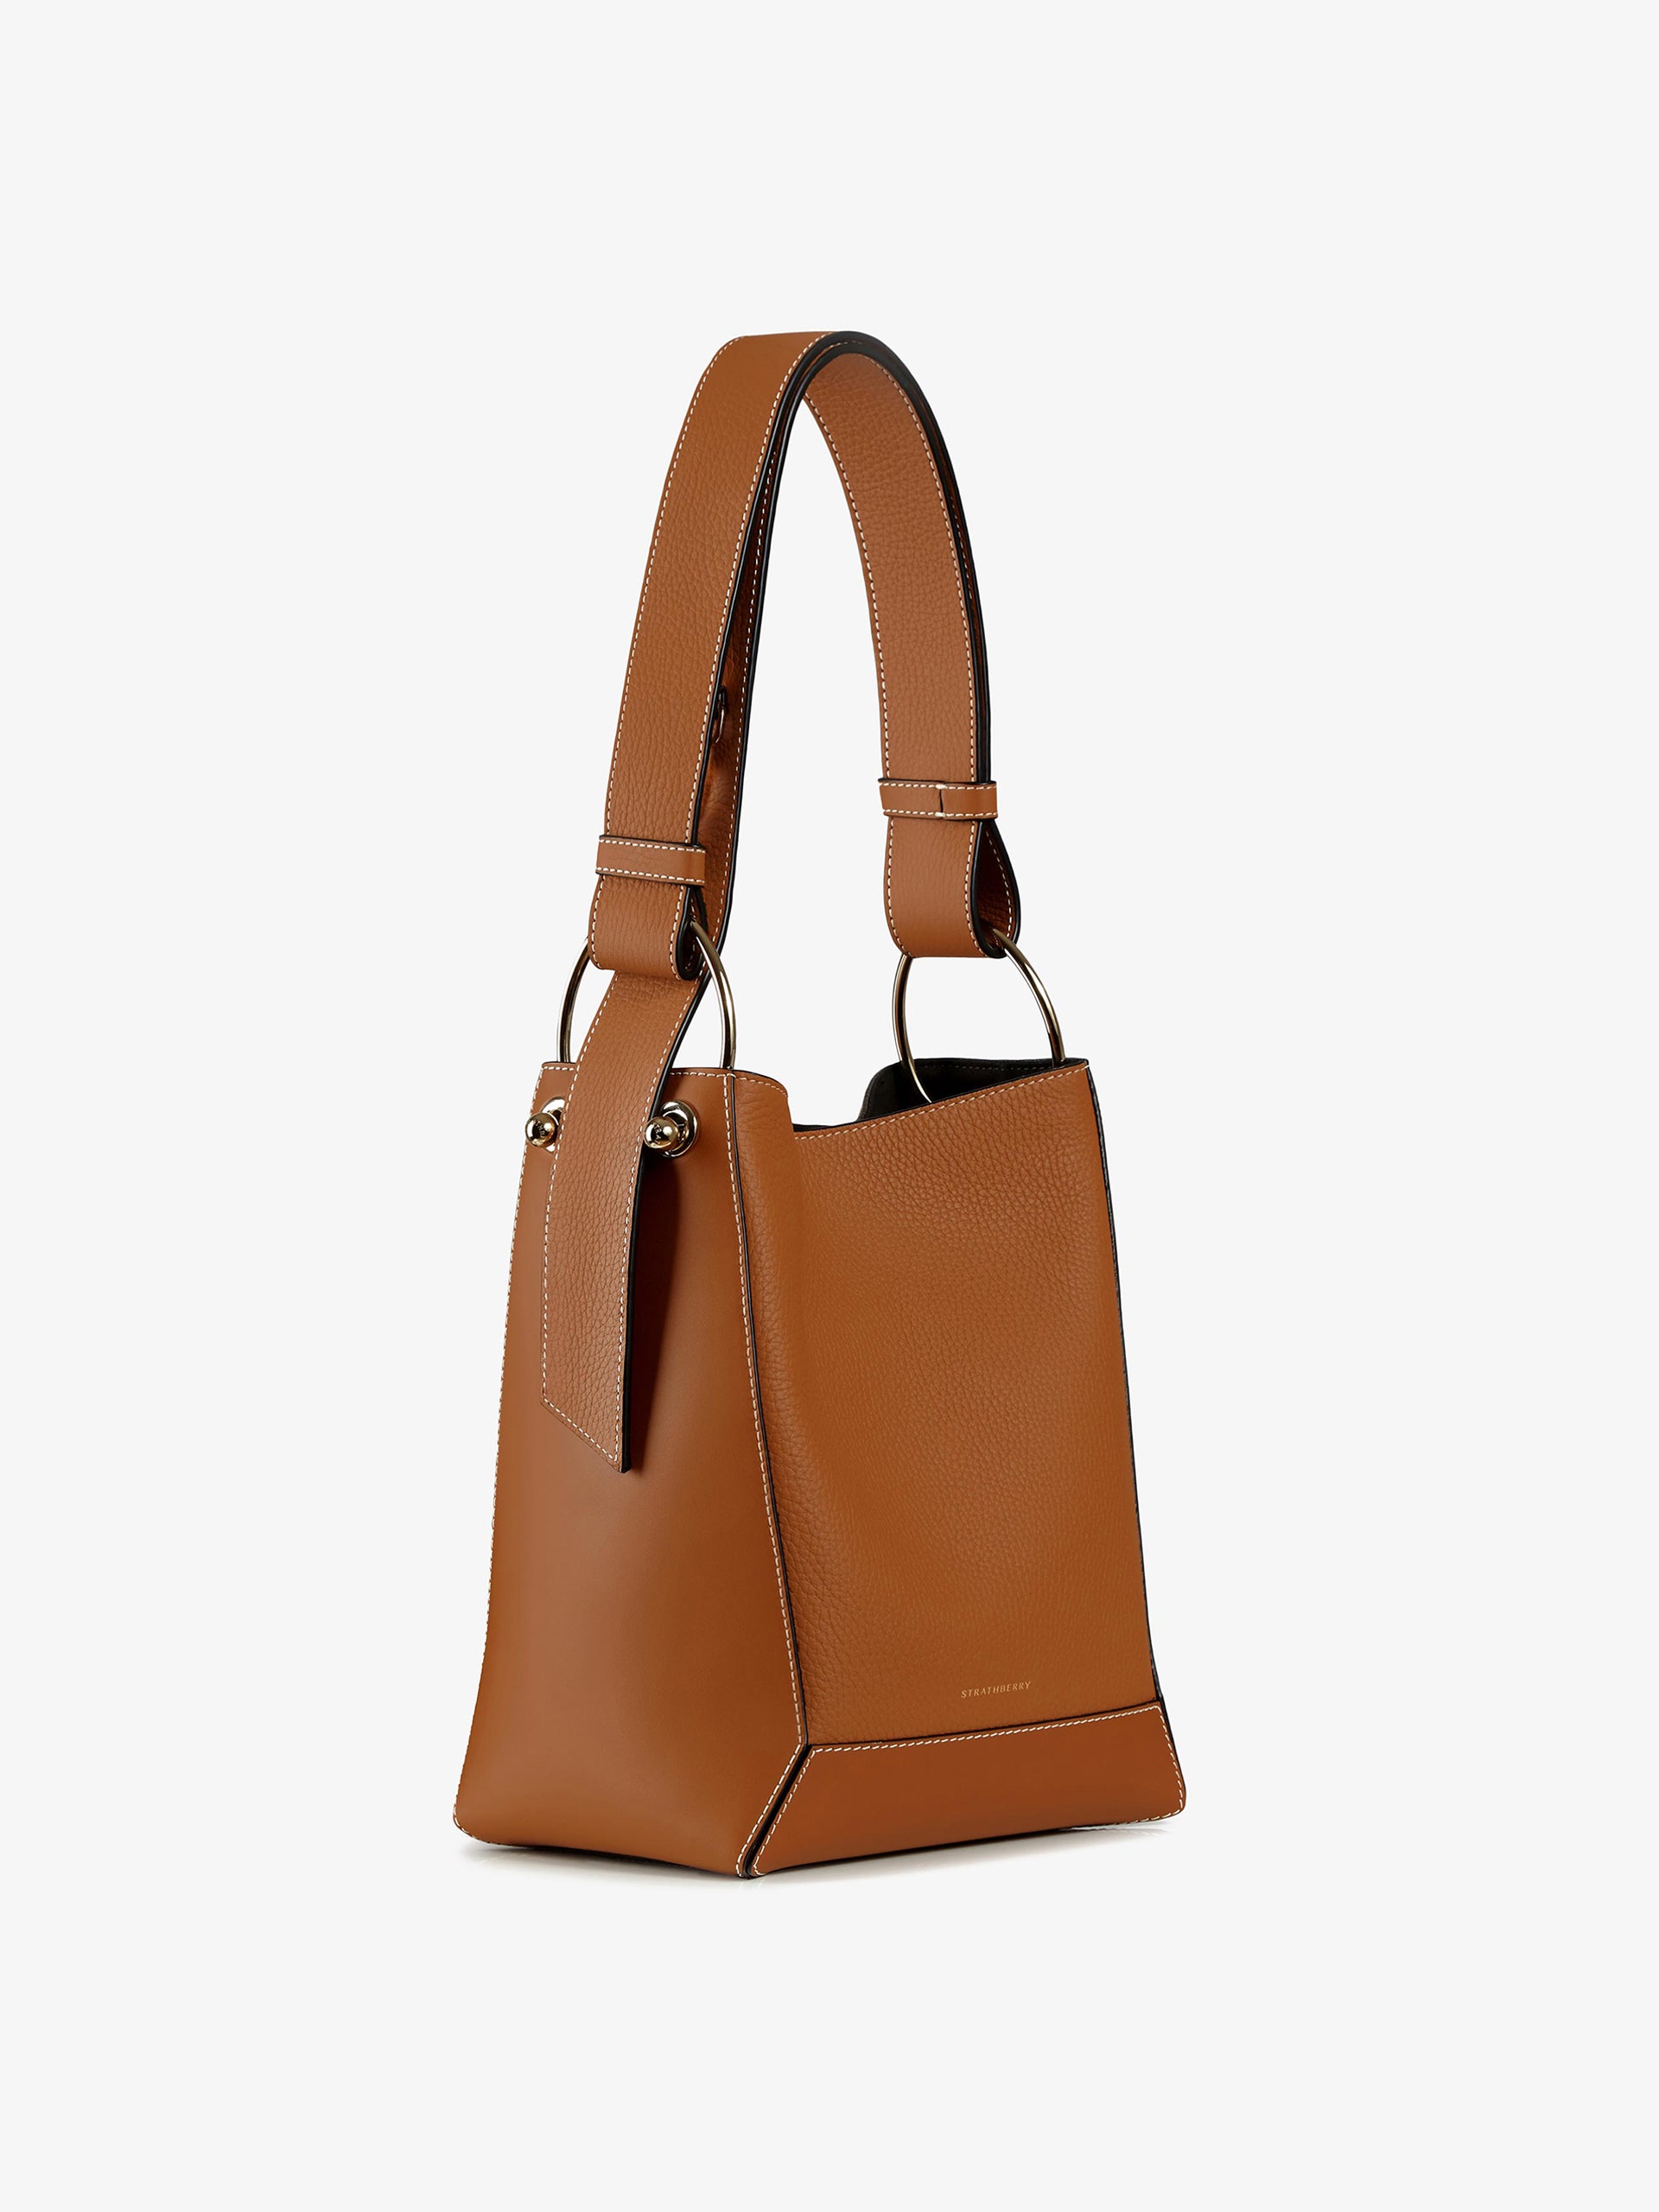 Lana Midi bucket bag in tan leather with white stitching - Collagerie